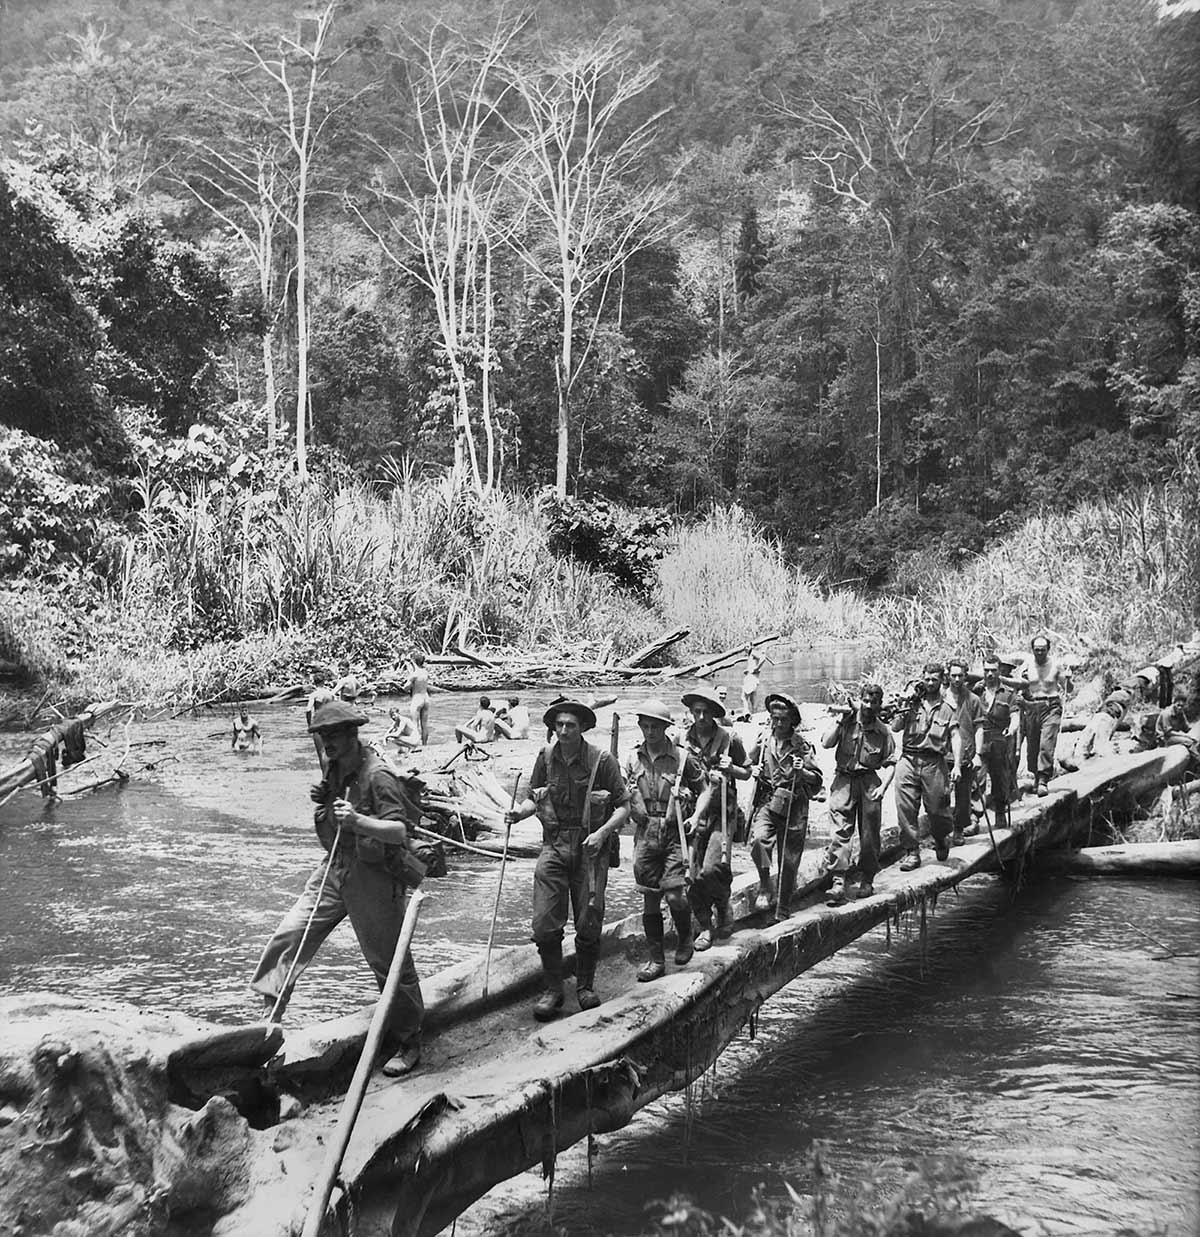 About 20 soldiers use a simple bridge that is little more than a pair of logs.